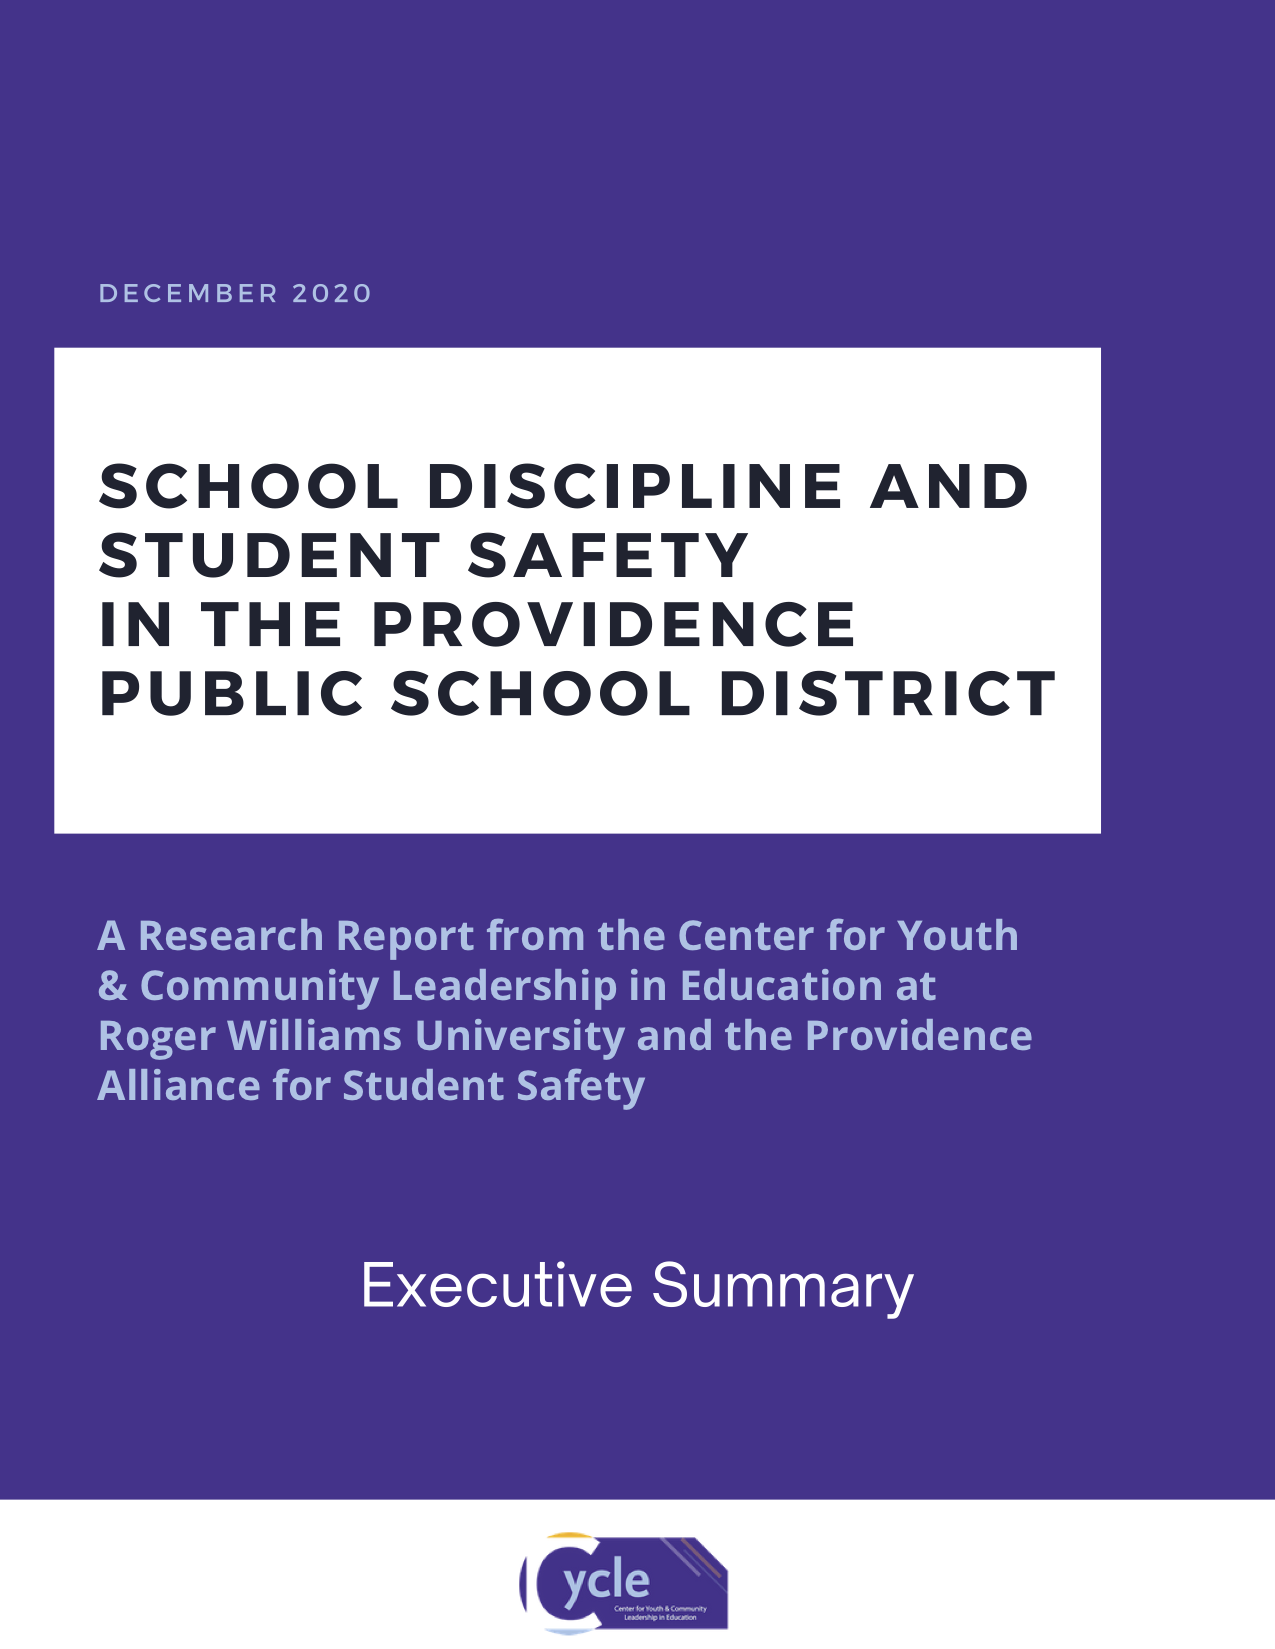 Executive Summary: School Discipline &amp; Student Safety in PPSD